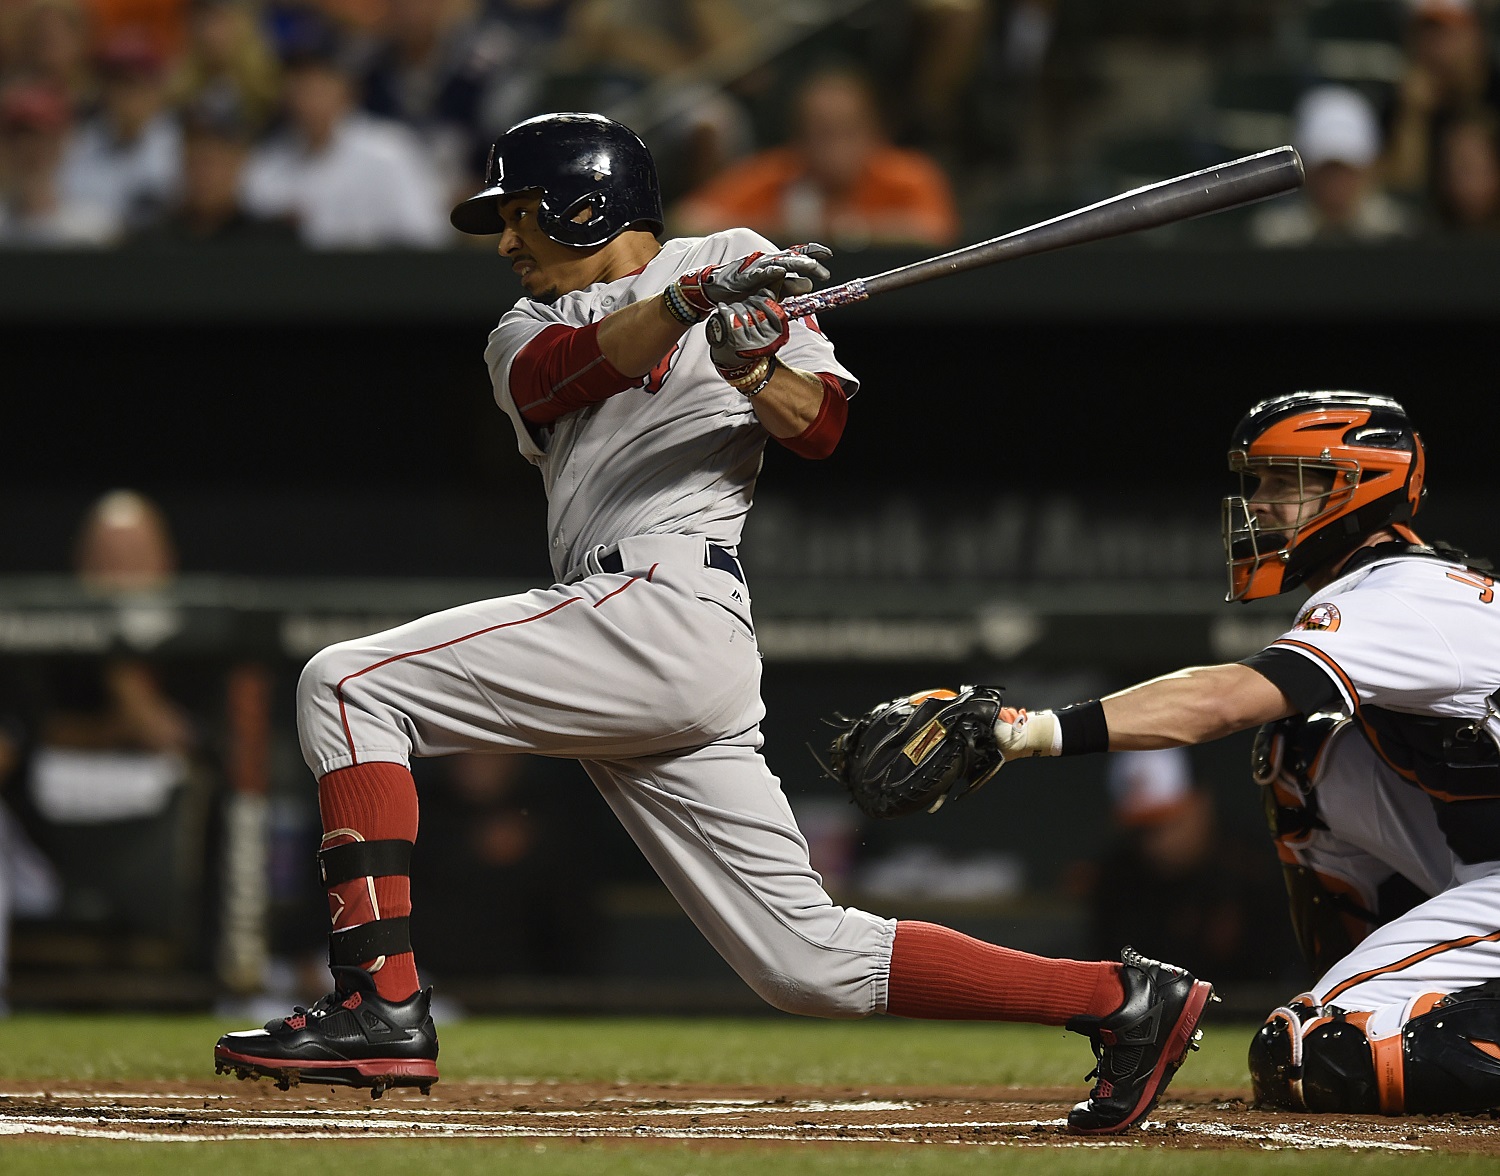 Boston Red Sox Mookie Betts follows through on a single against the Baltimore Orioles in the first inning of a baseball game, Thursday, Sept. 22, 2016, in Baltimore. (AP Photo/Gail Burton)